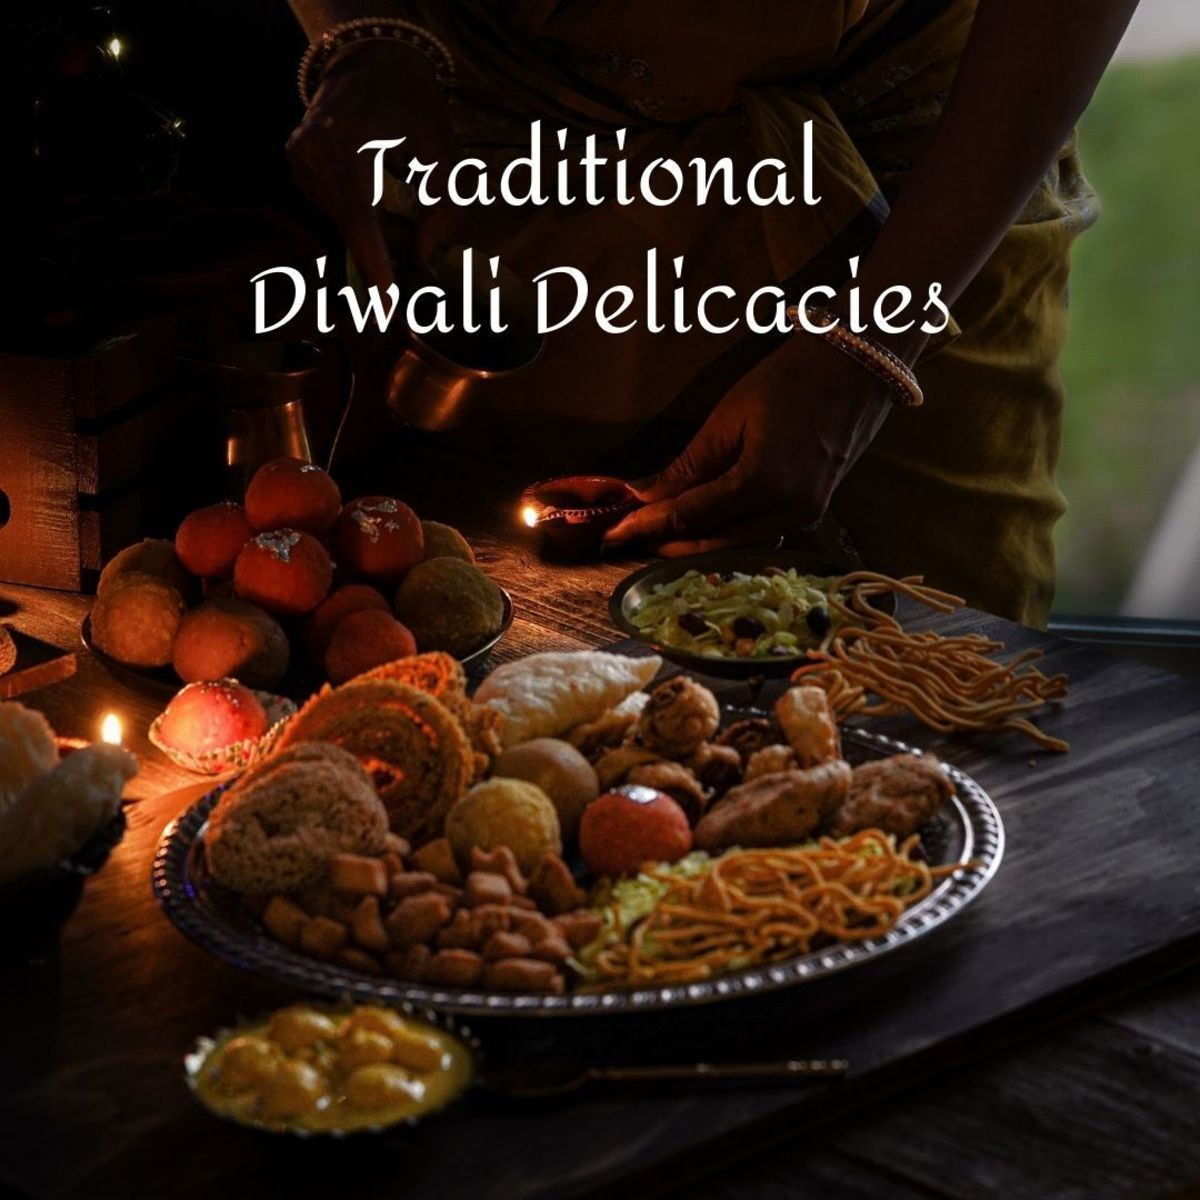 Diwali sweets and crisp and crunchy snacks for the Diwali celebration.